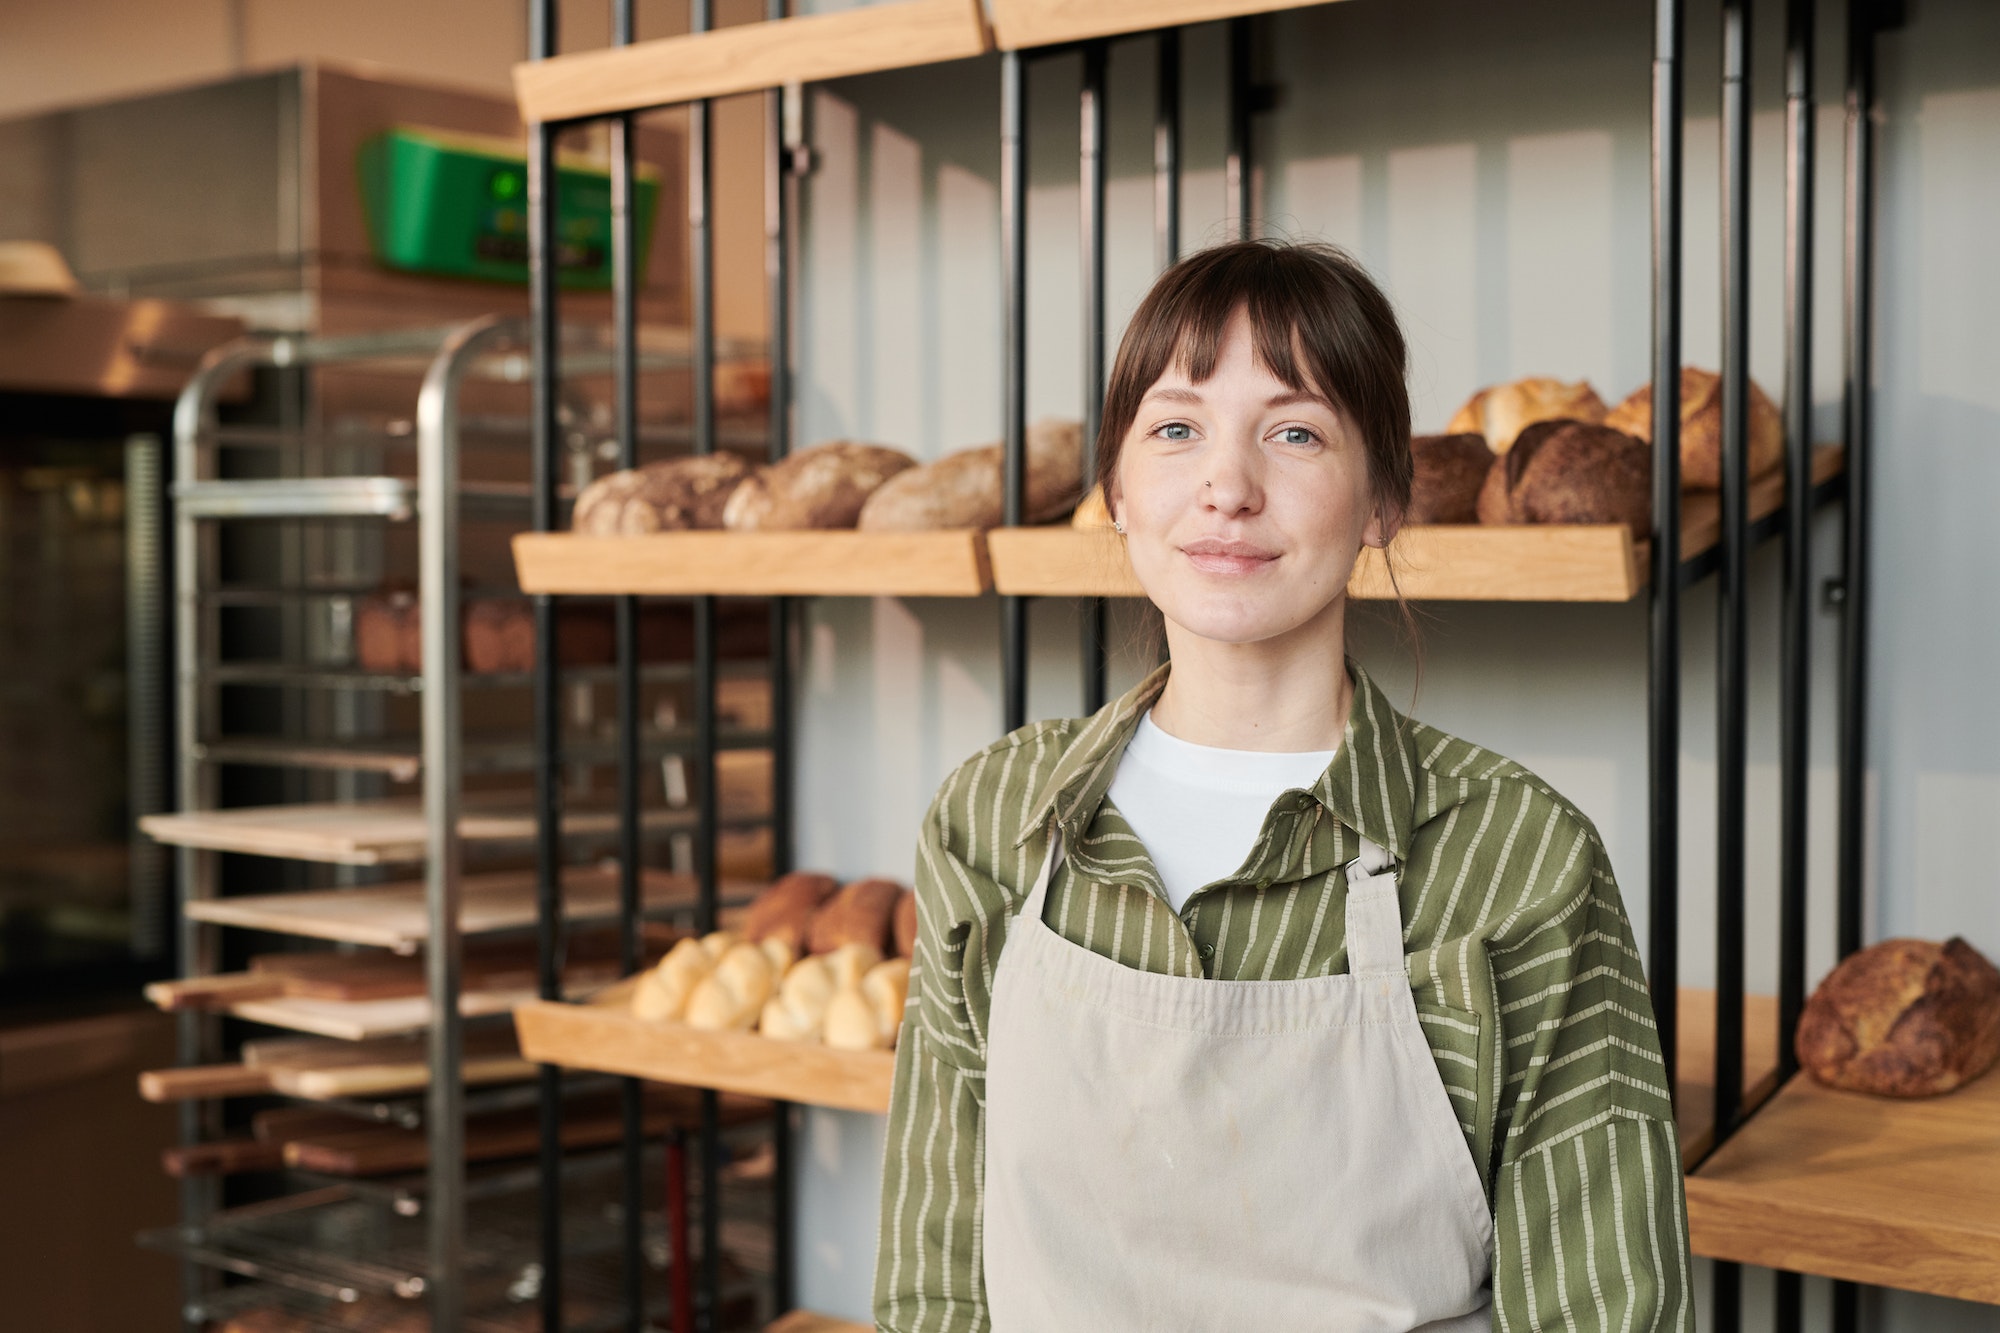 Breaking Bread in a New State: How to Establish Your Bakery in a New Location